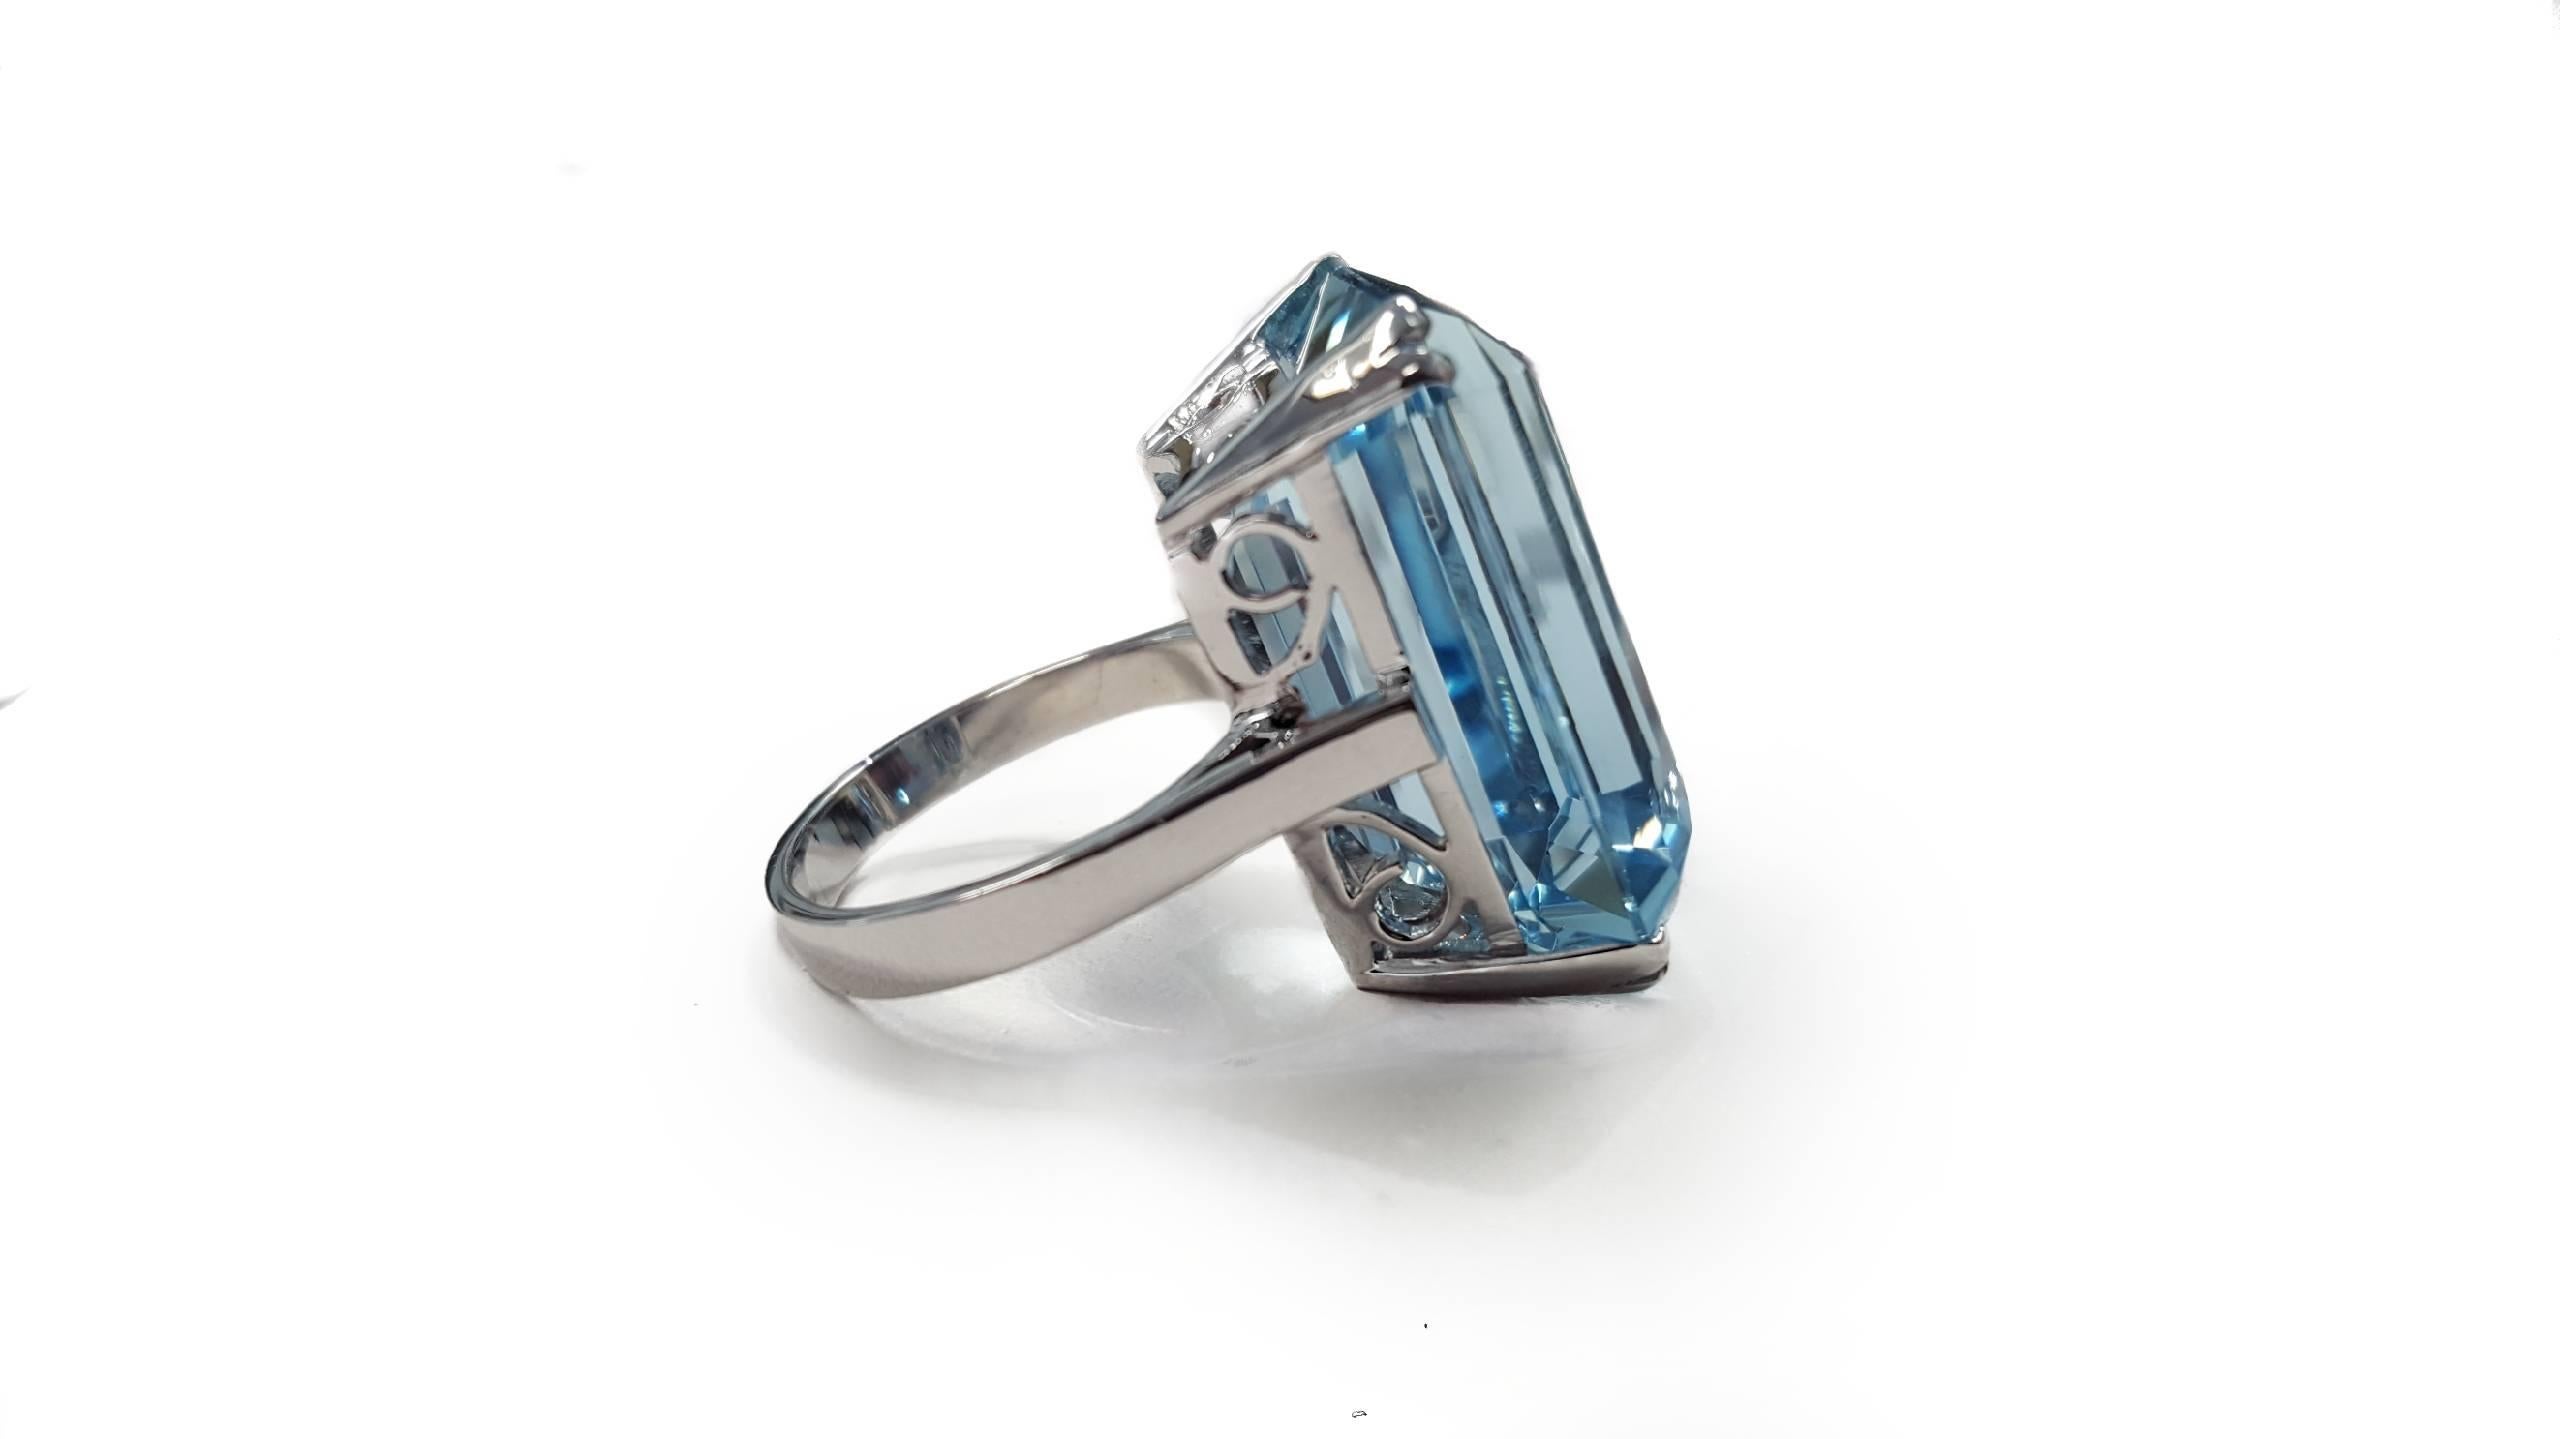 White gold ring set with an estimated 30ct Aquamarine. The stone measures 22.55 x 16.48 x 10.55mm. The ring weighs 6.70dwt